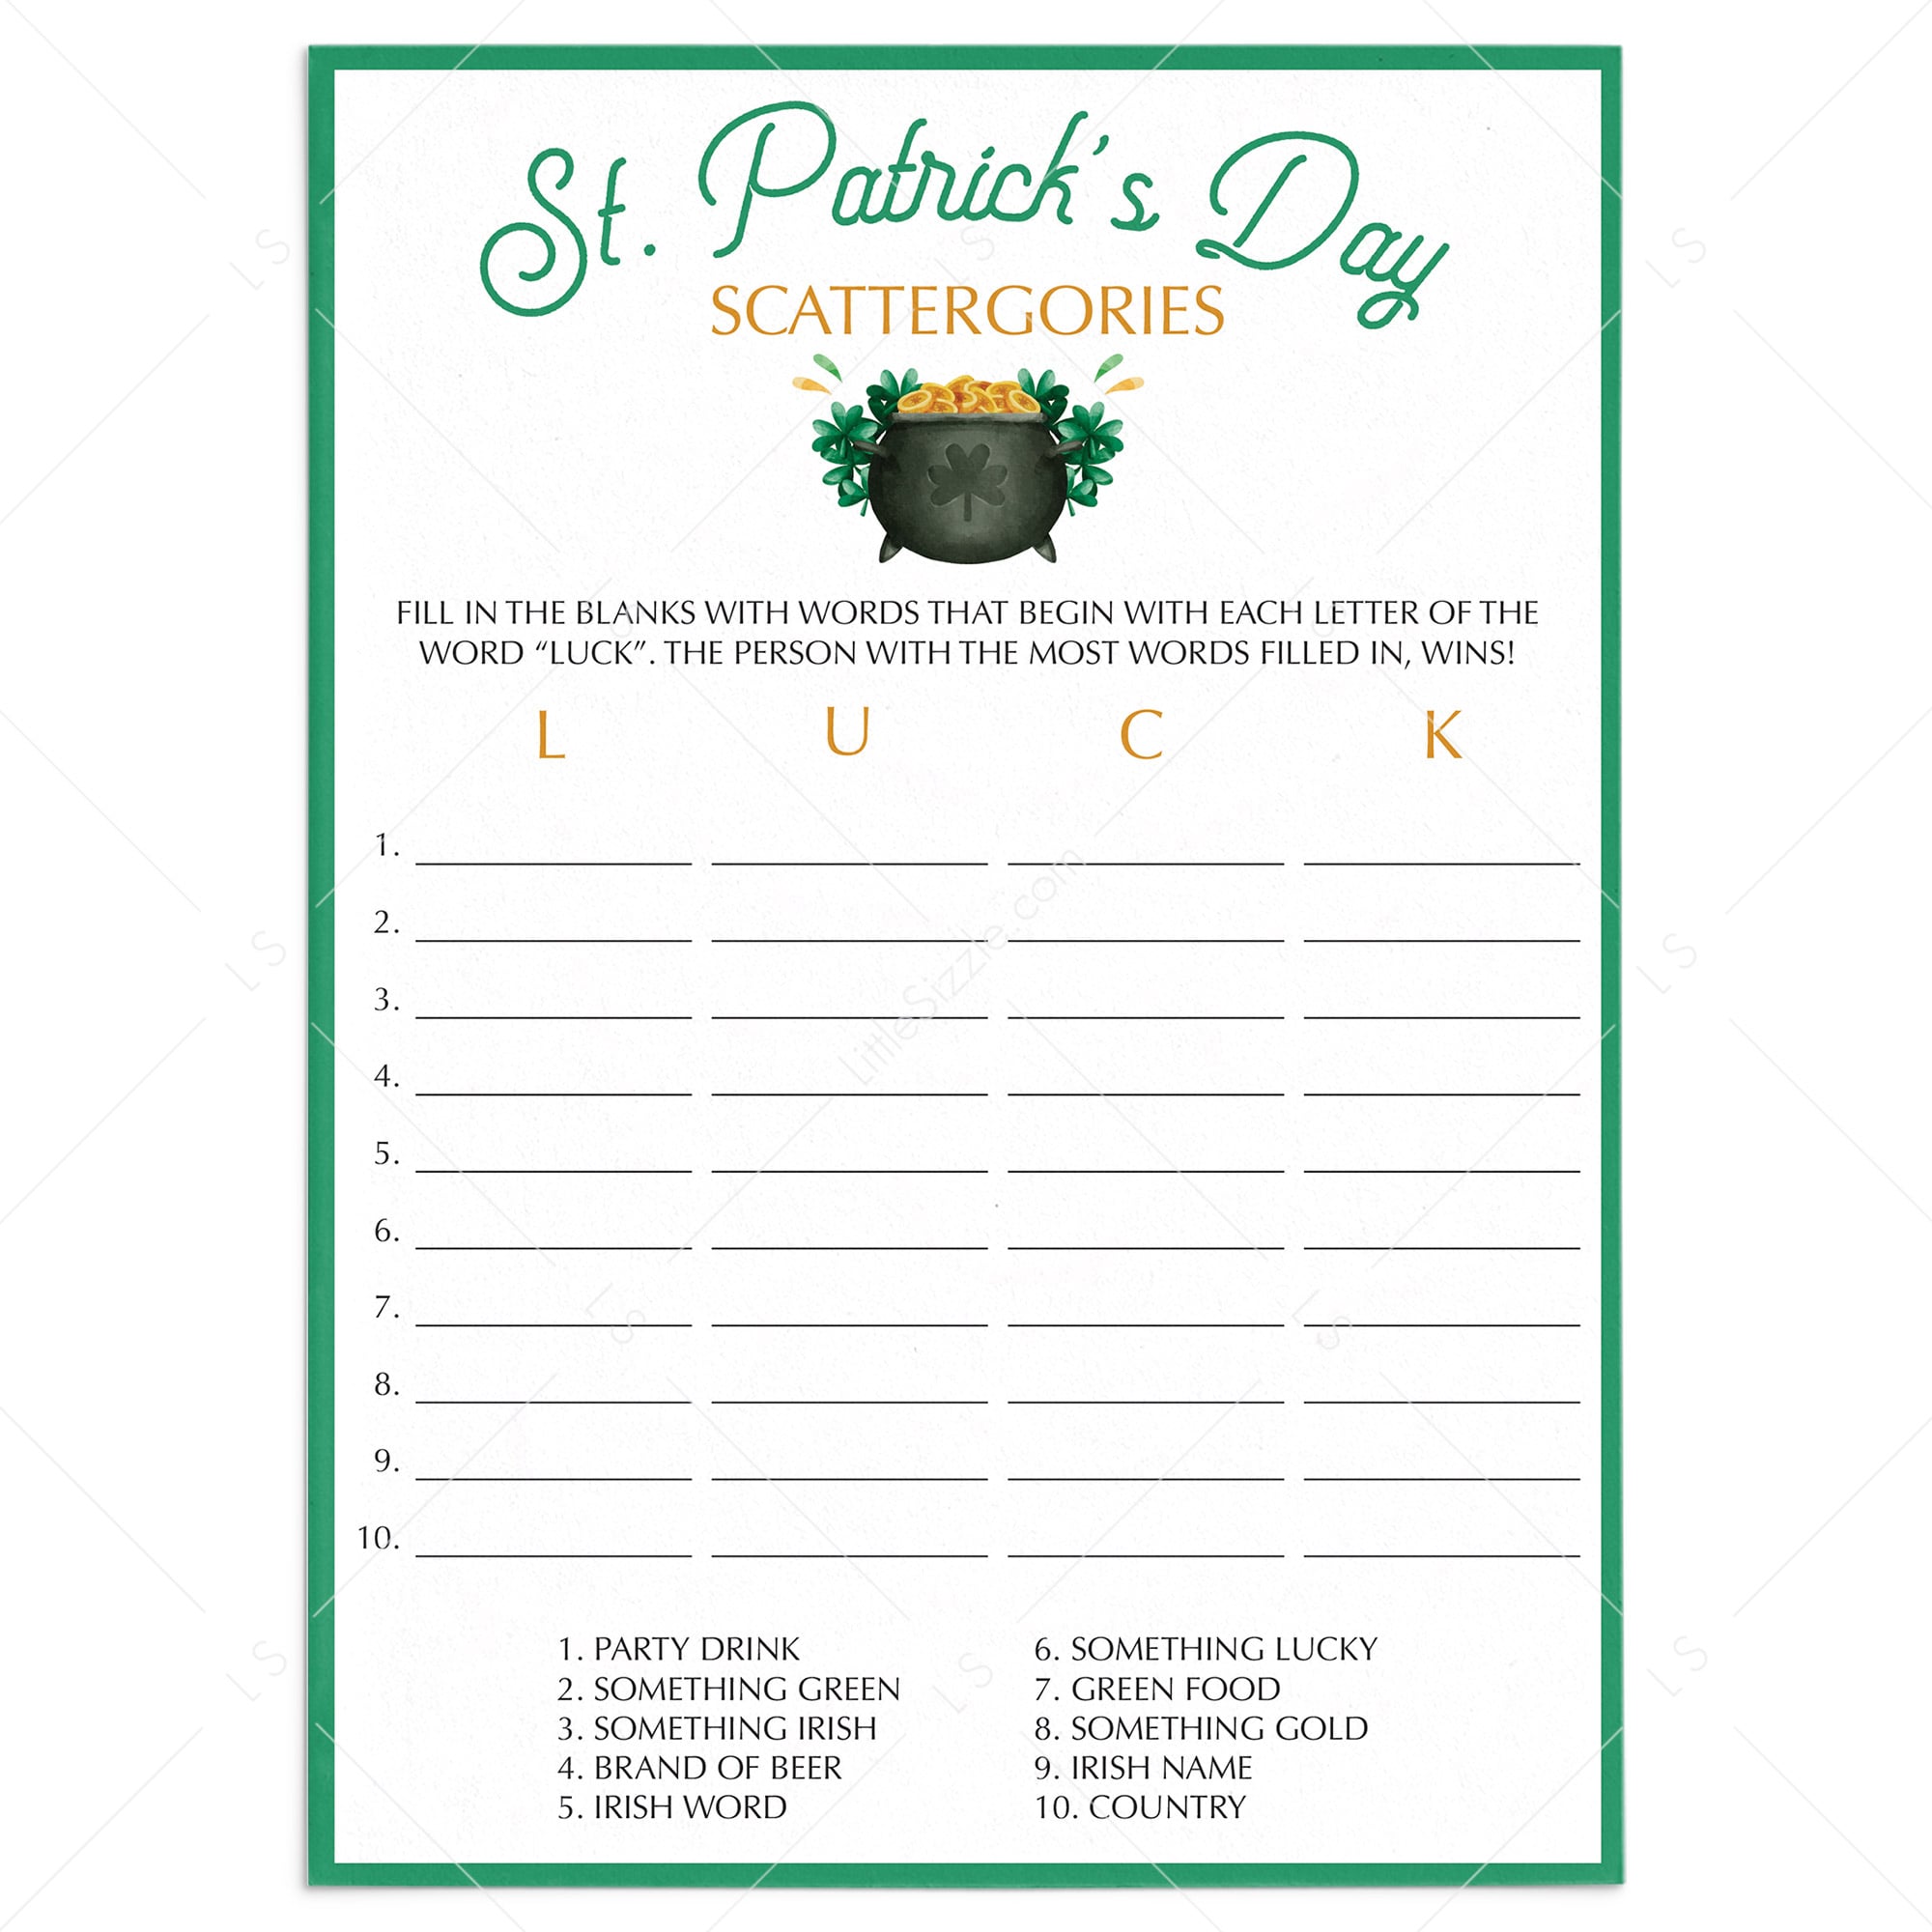 St. Patrick's Day Game For Kids Scattergories by LittleSizzle